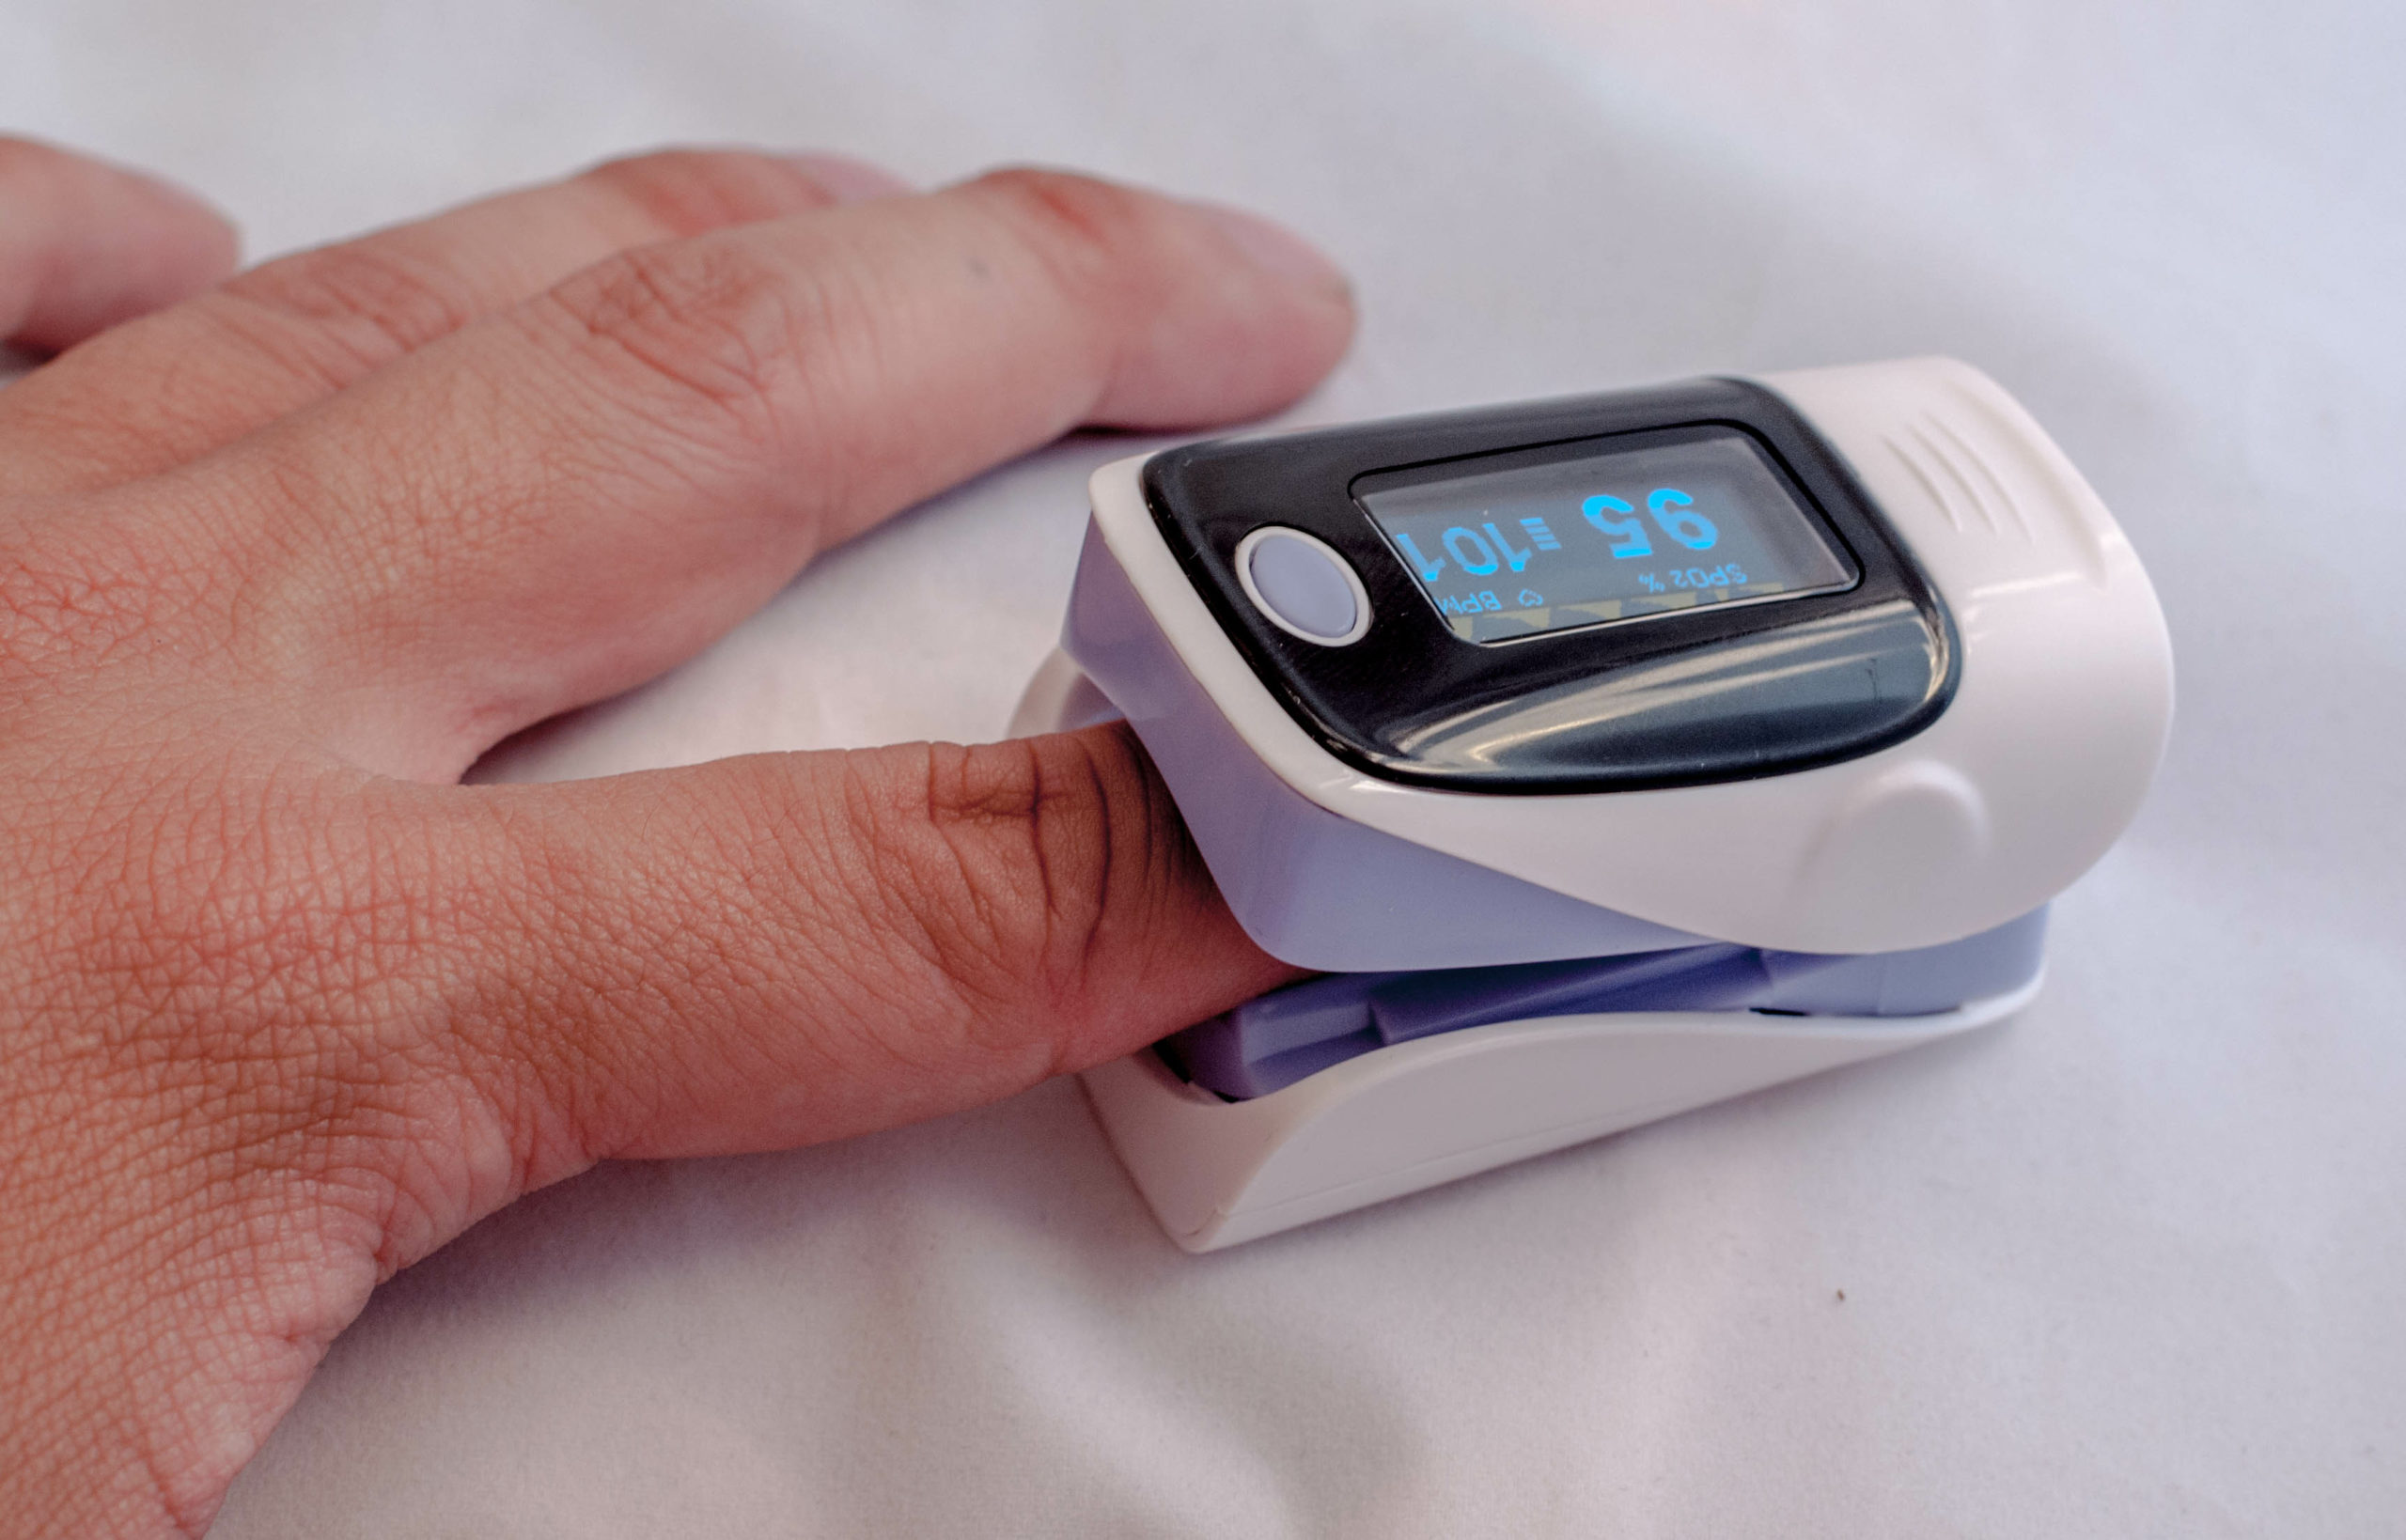 Pulse oximeter on the patient's hand